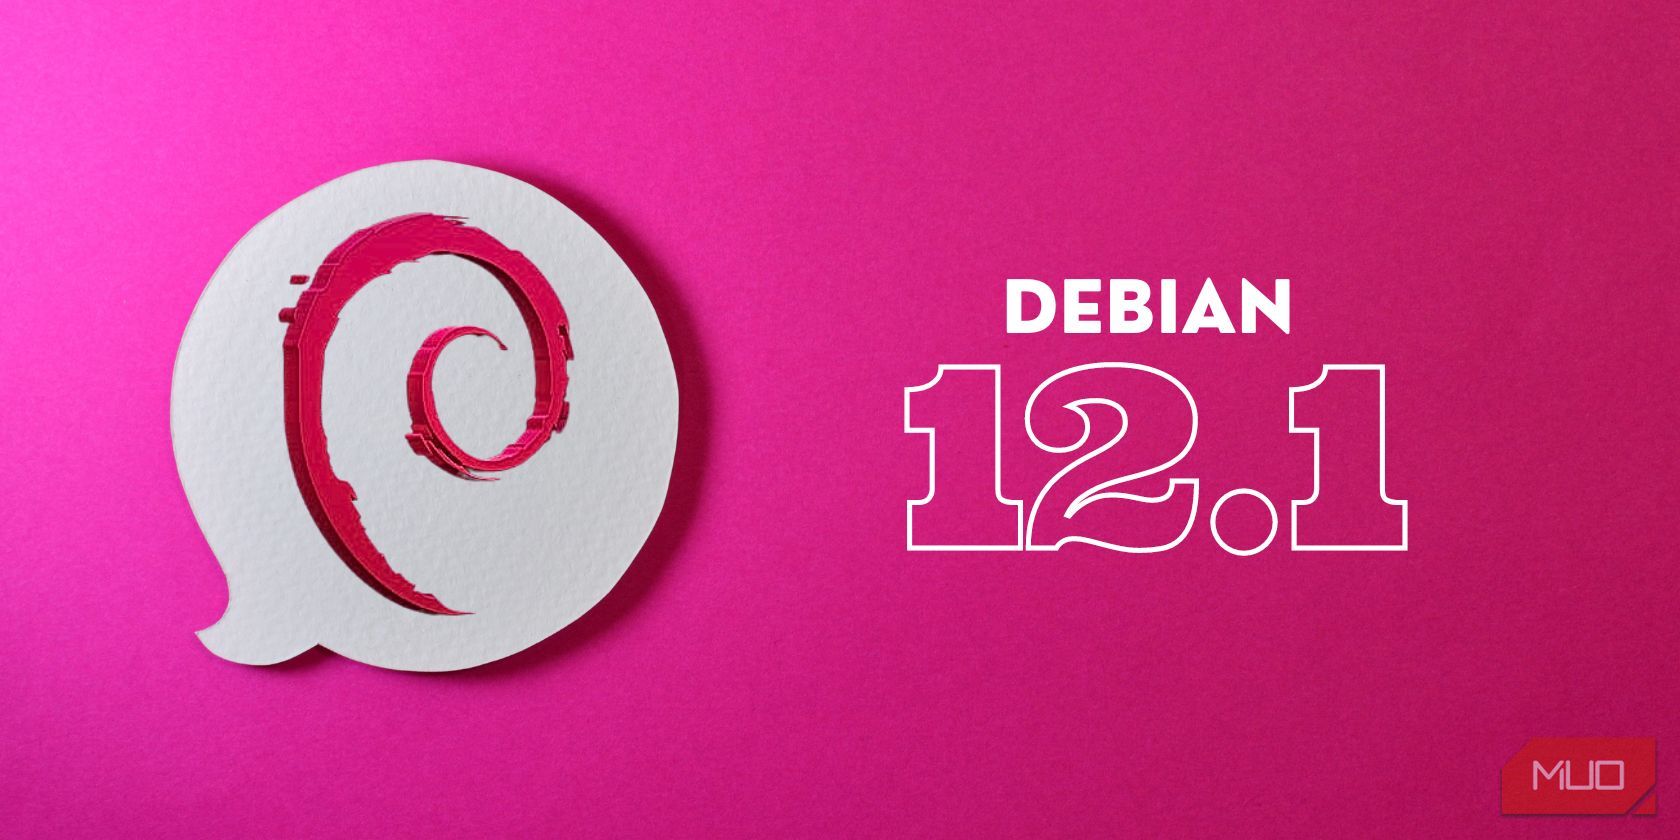 Debian 12 logo with Text